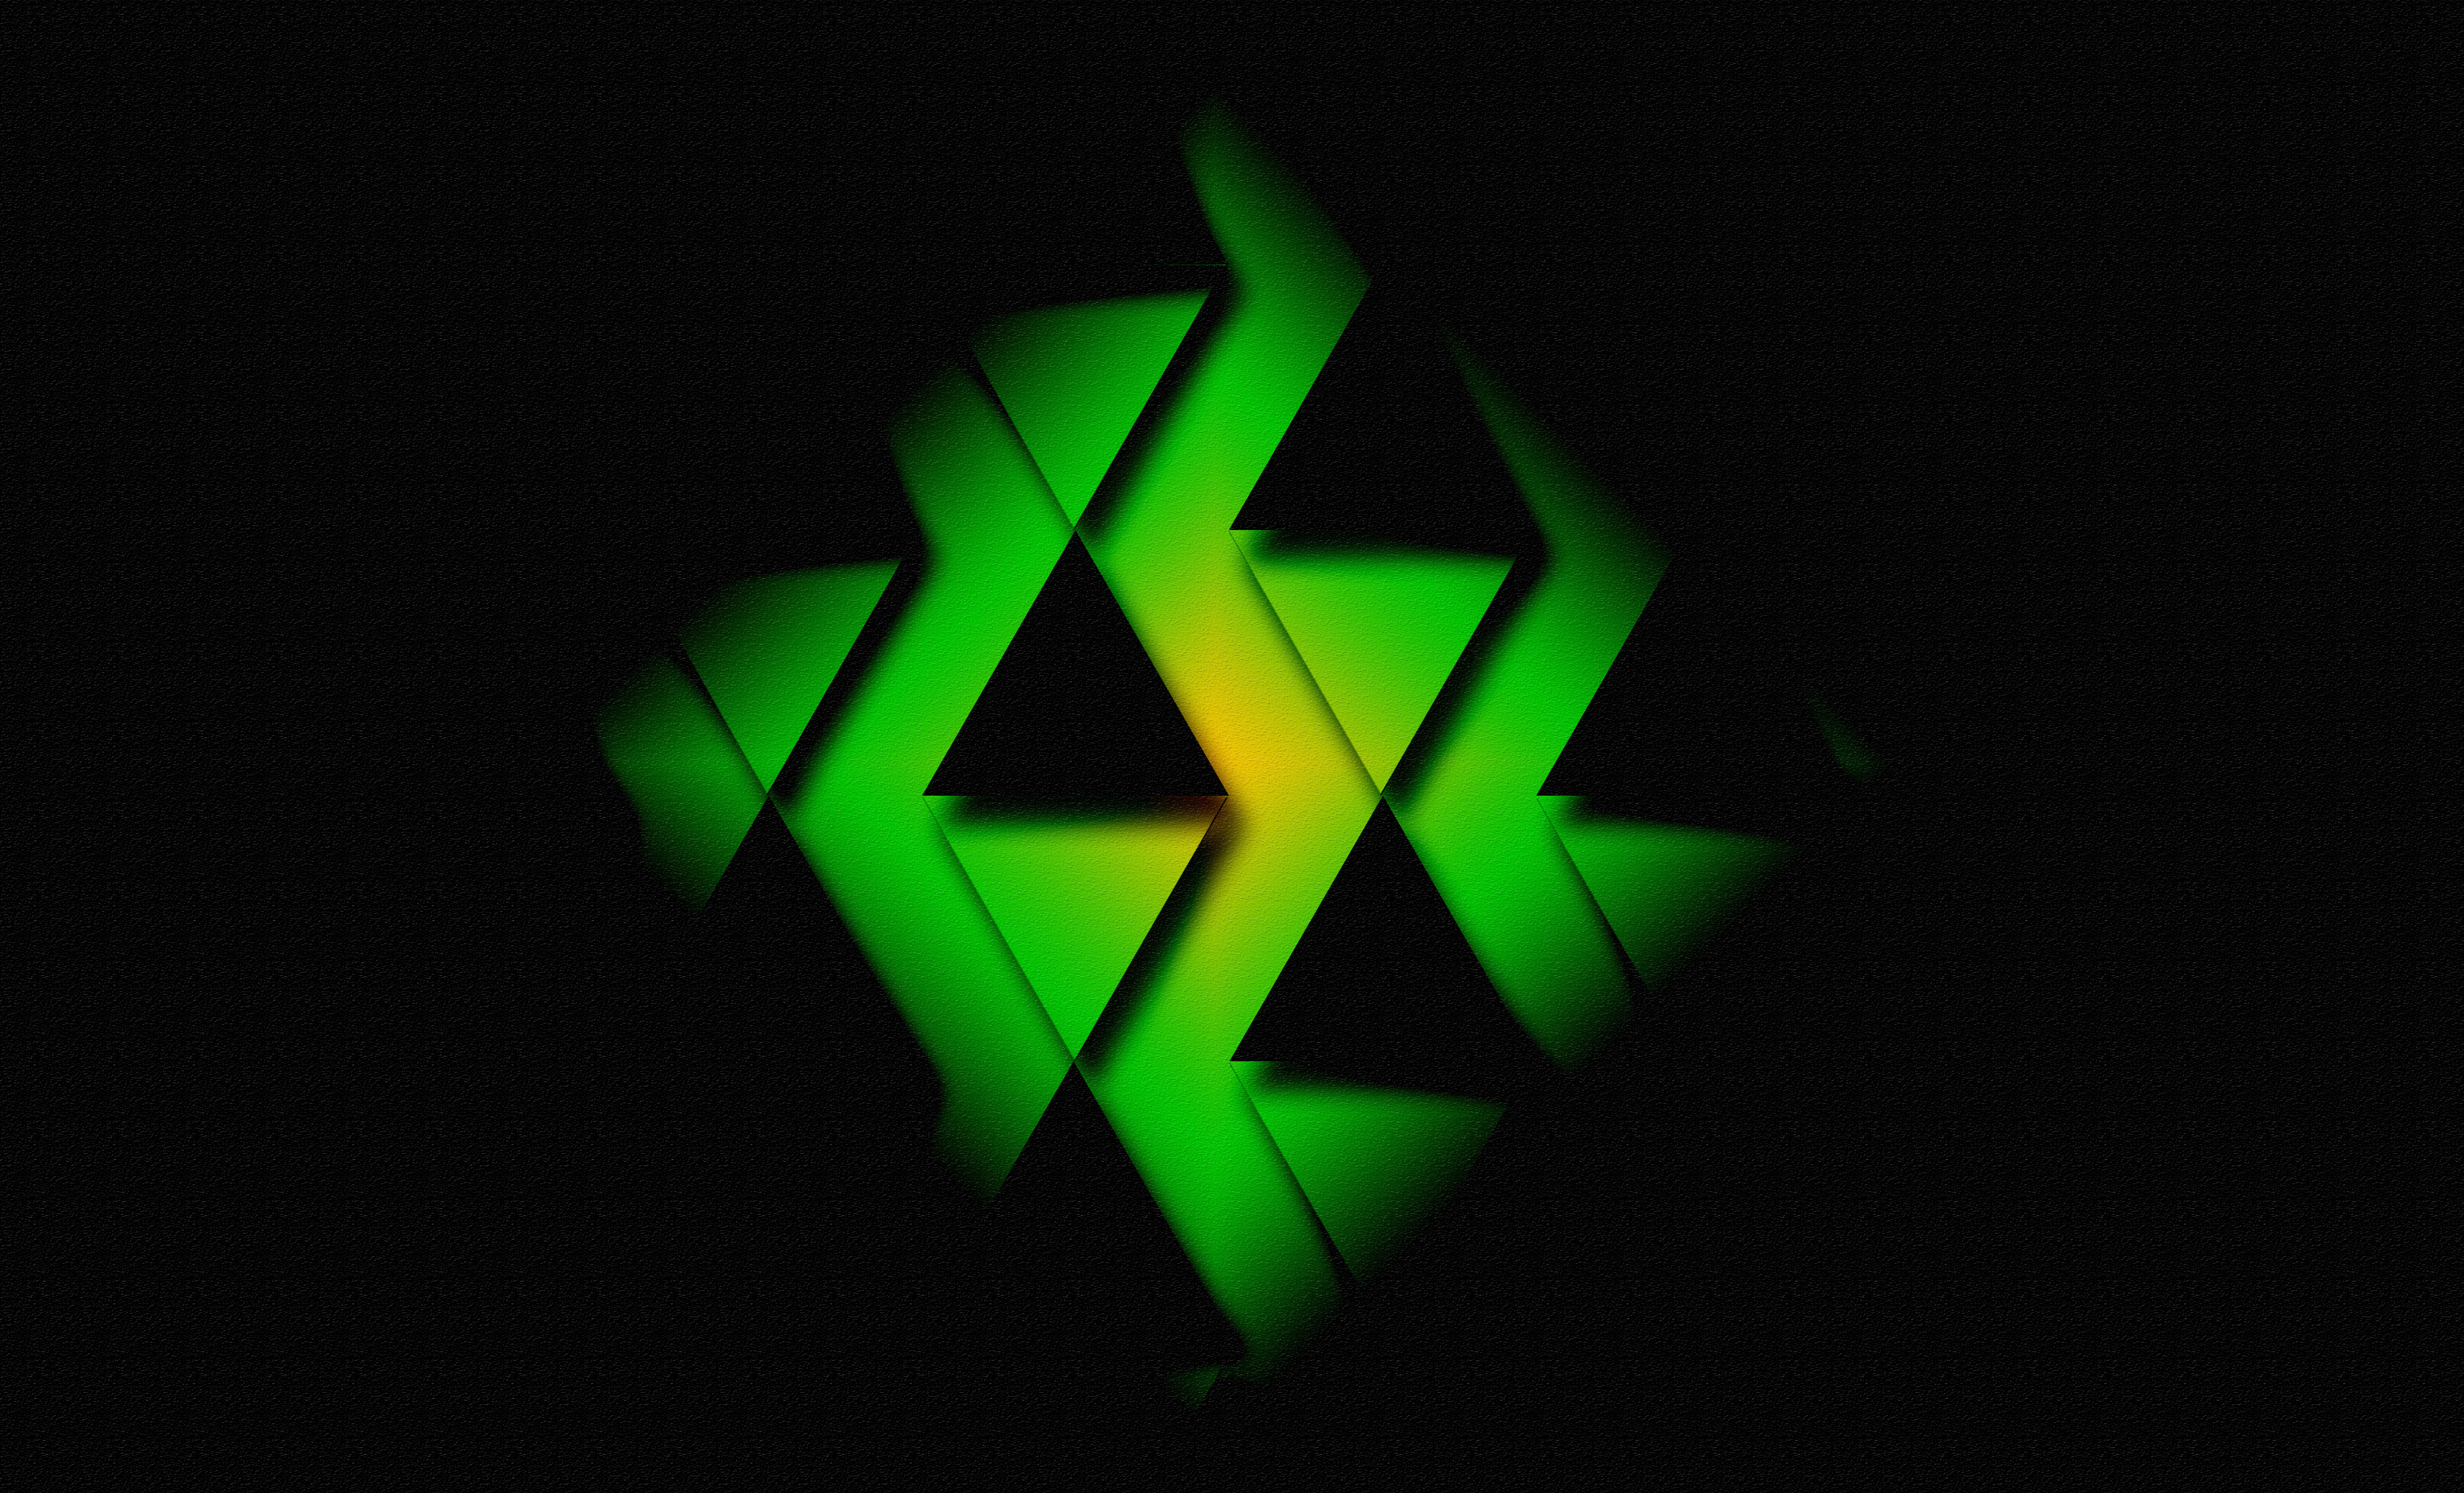 Black & Green Triangle Wallpaper, HD Abstract 4K Wallpapers, Images and